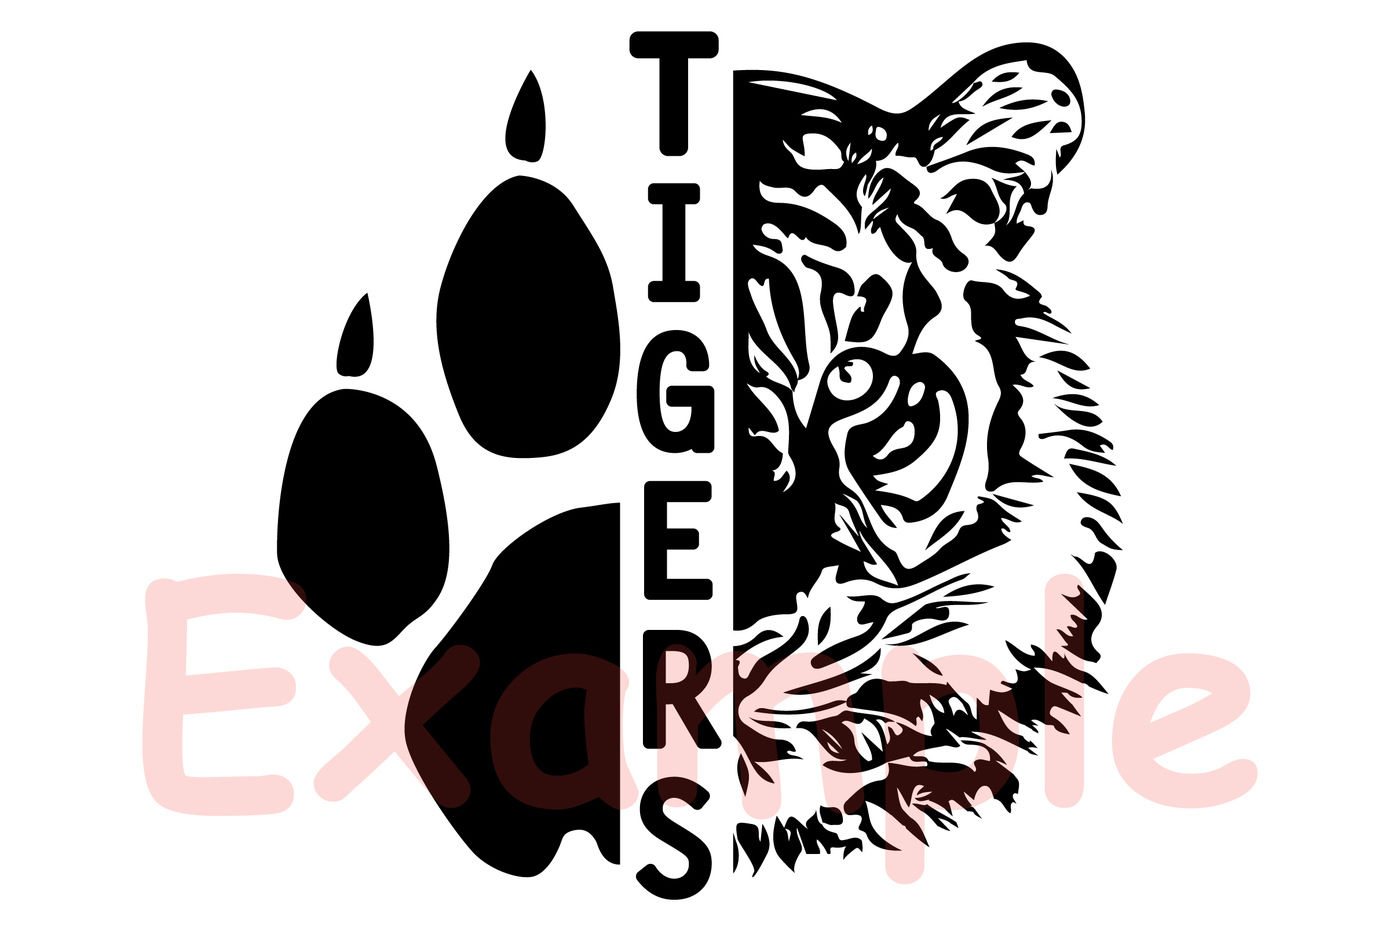 Download Tigers Head Svg Wild Football Baseball Basketball Soccer 949s By Hamhamart Thehungryjpeg Com SVG, PNG, EPS, DXF File